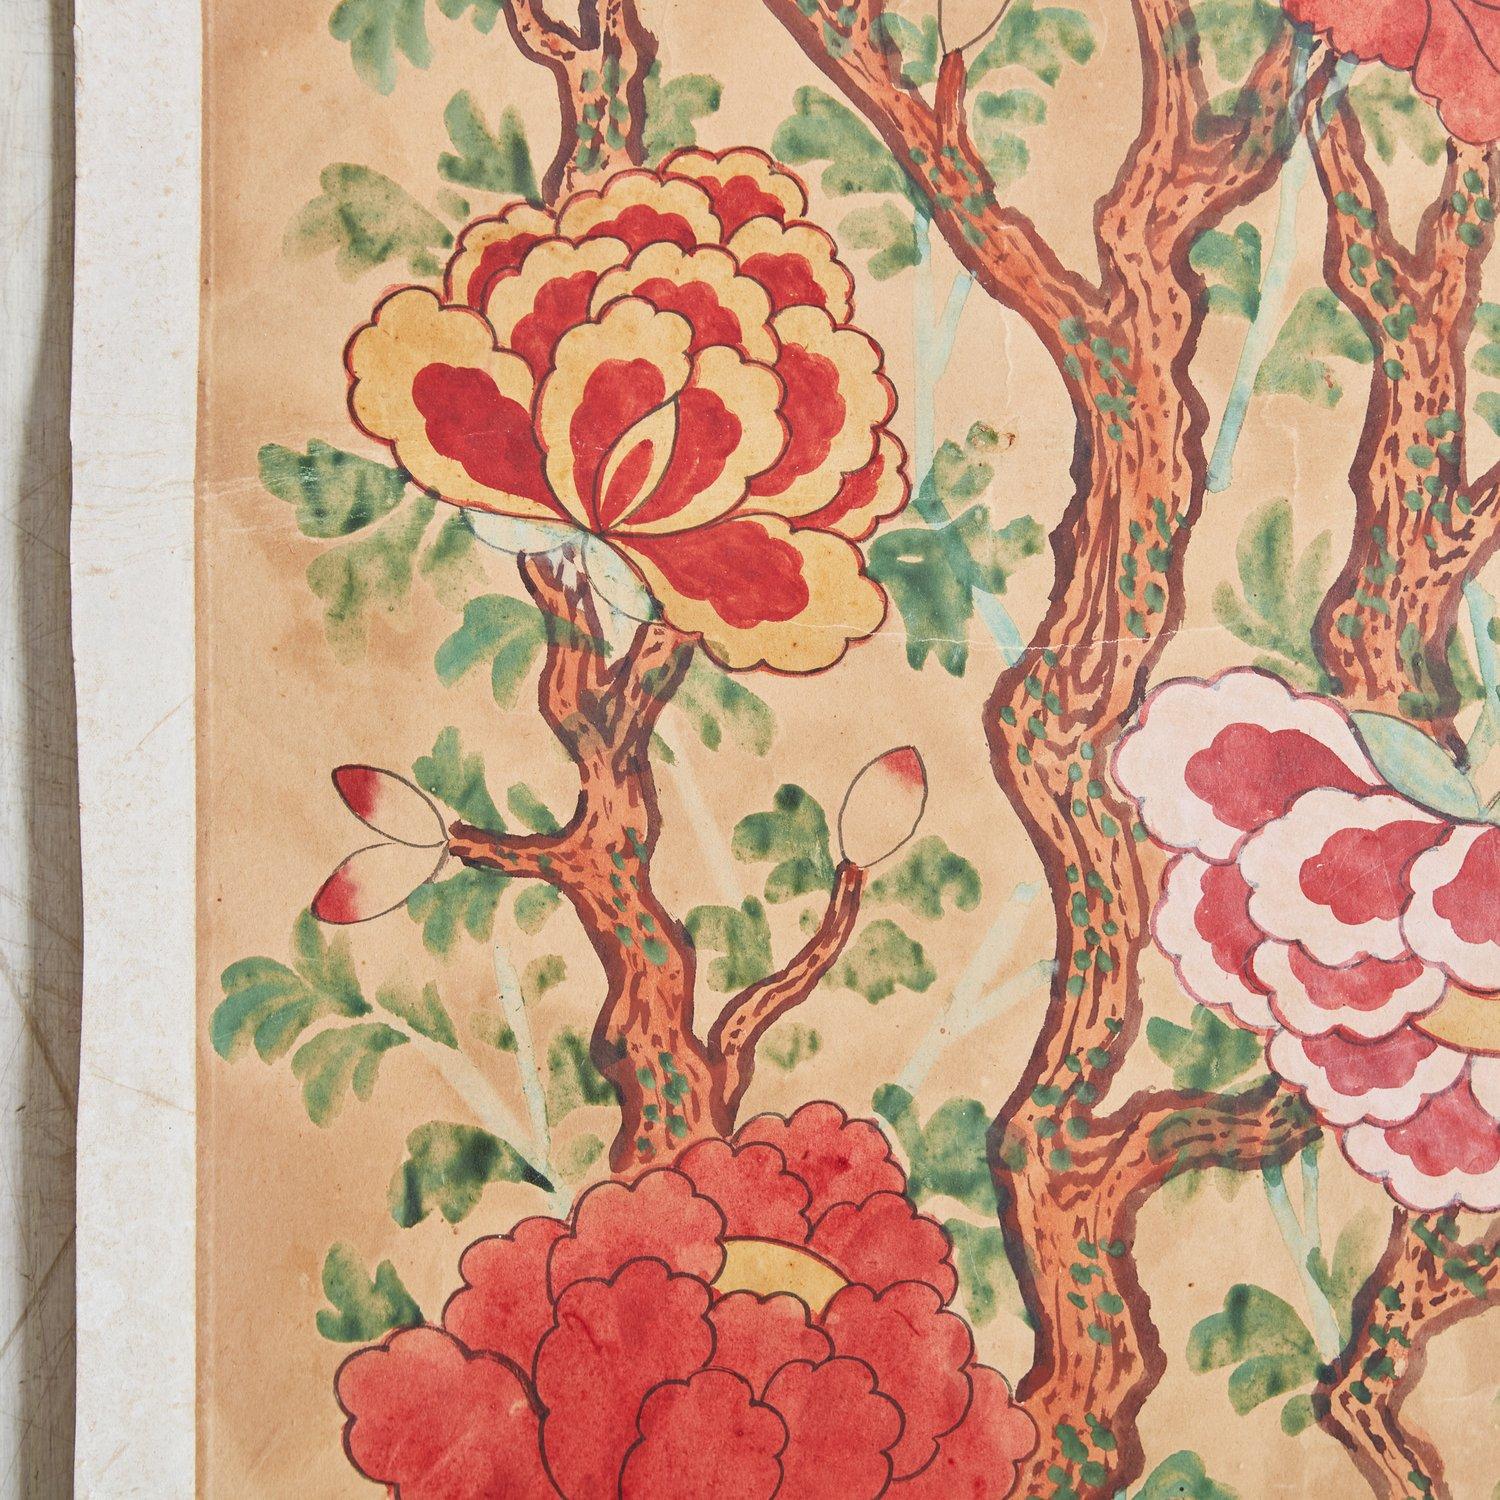 Vintage Chinese hand painted watercolor on paper featuring vibrant floral designs. This piece was acquired from a collector specializing in Chinese art based in Korea and Taiwan. 20th century. One available.